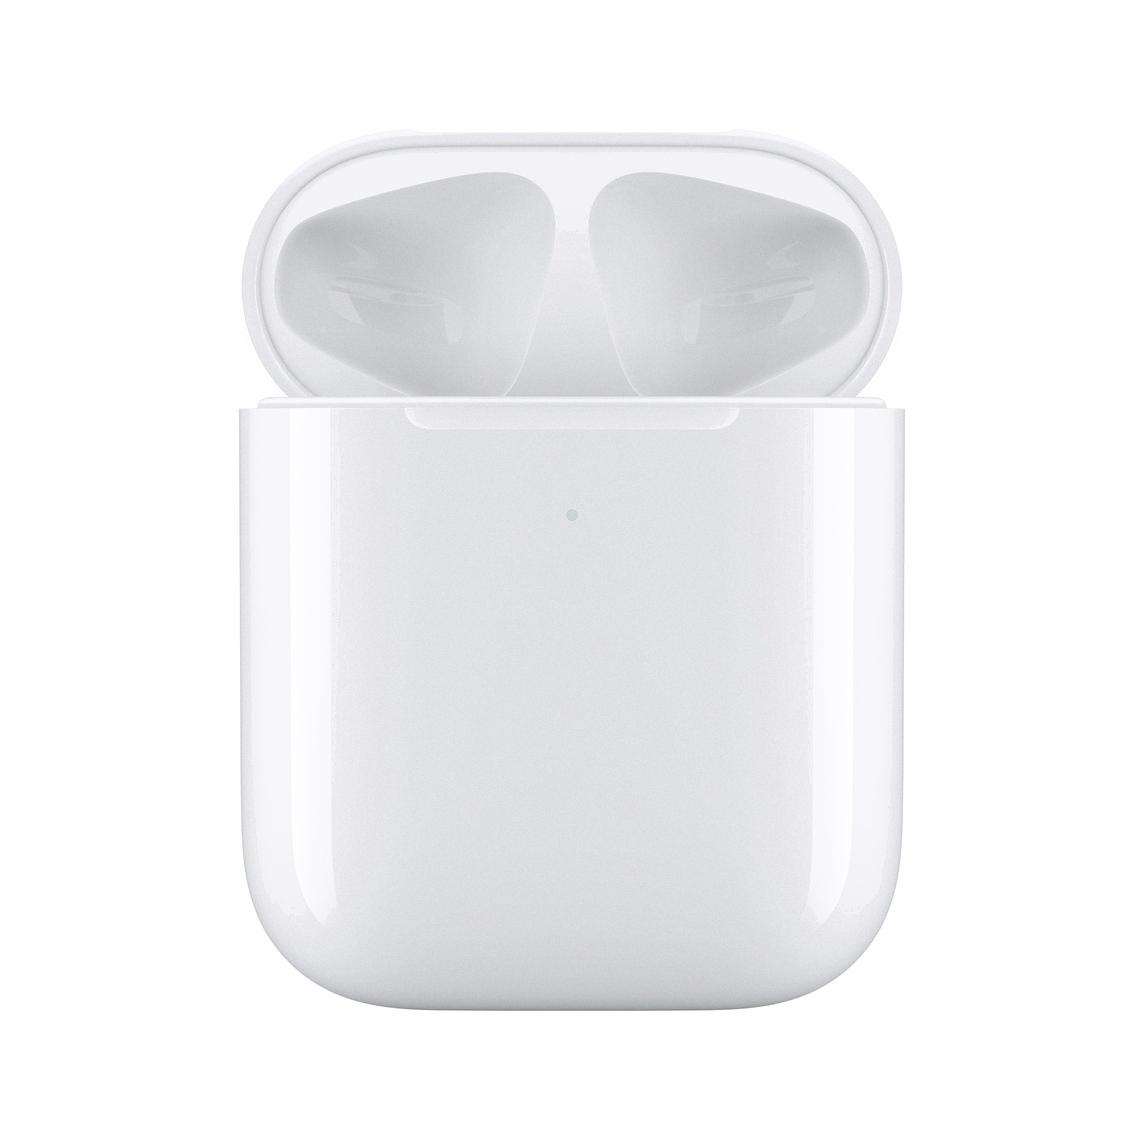 airpod case replacement cost